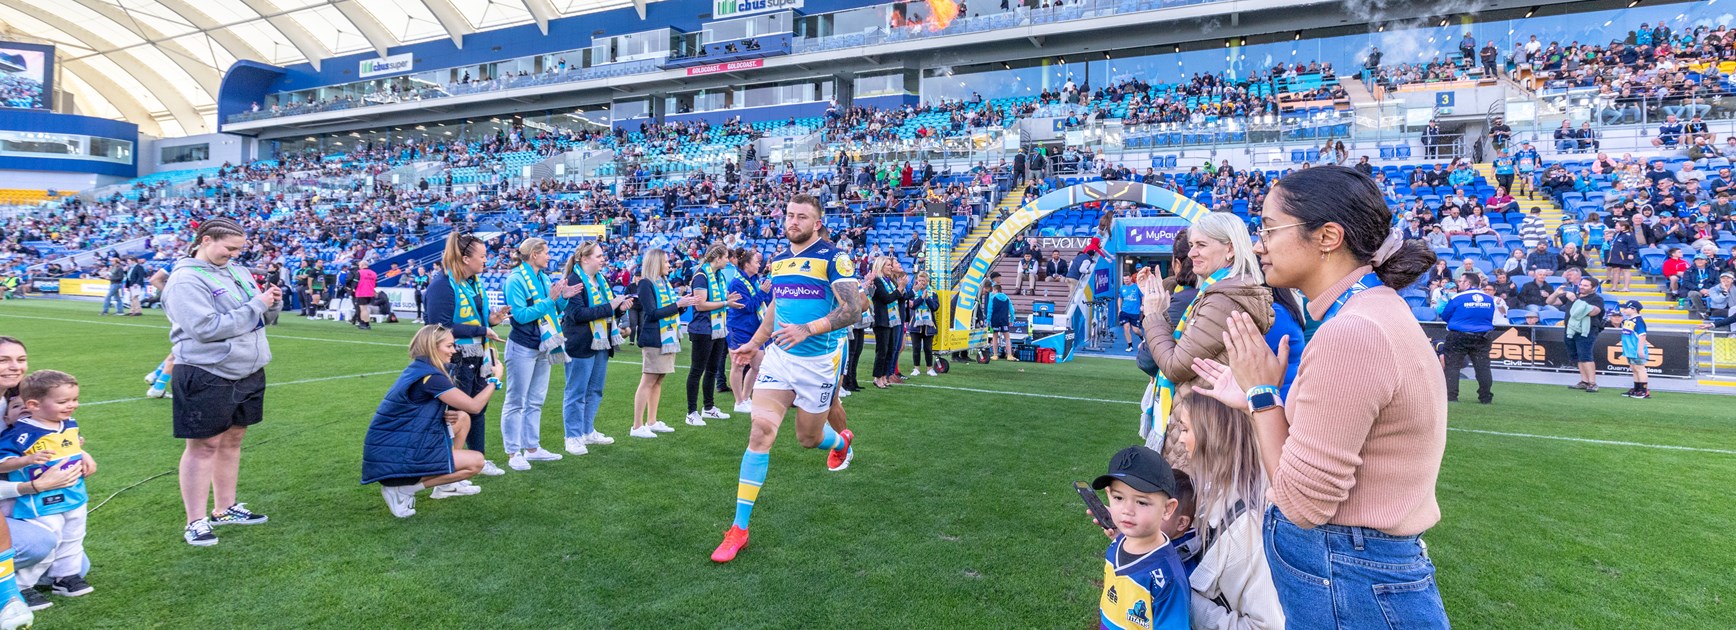 Great touch prior to kick-off for Sunday's NRL clash at Cbus